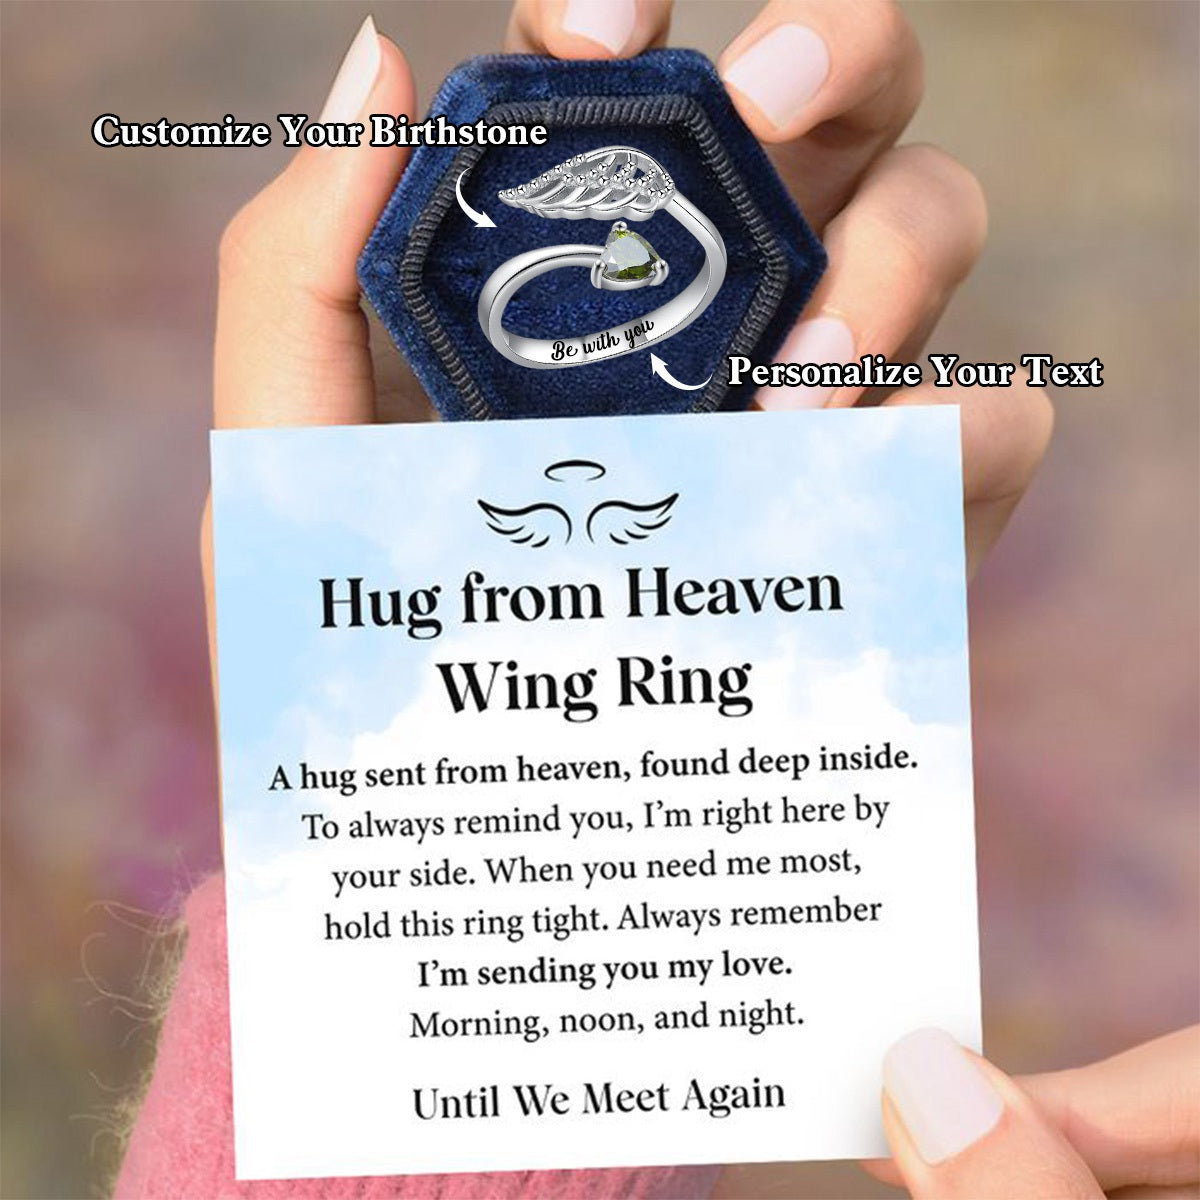 Personalized Hug from Heaven Wing Birthstone Ring